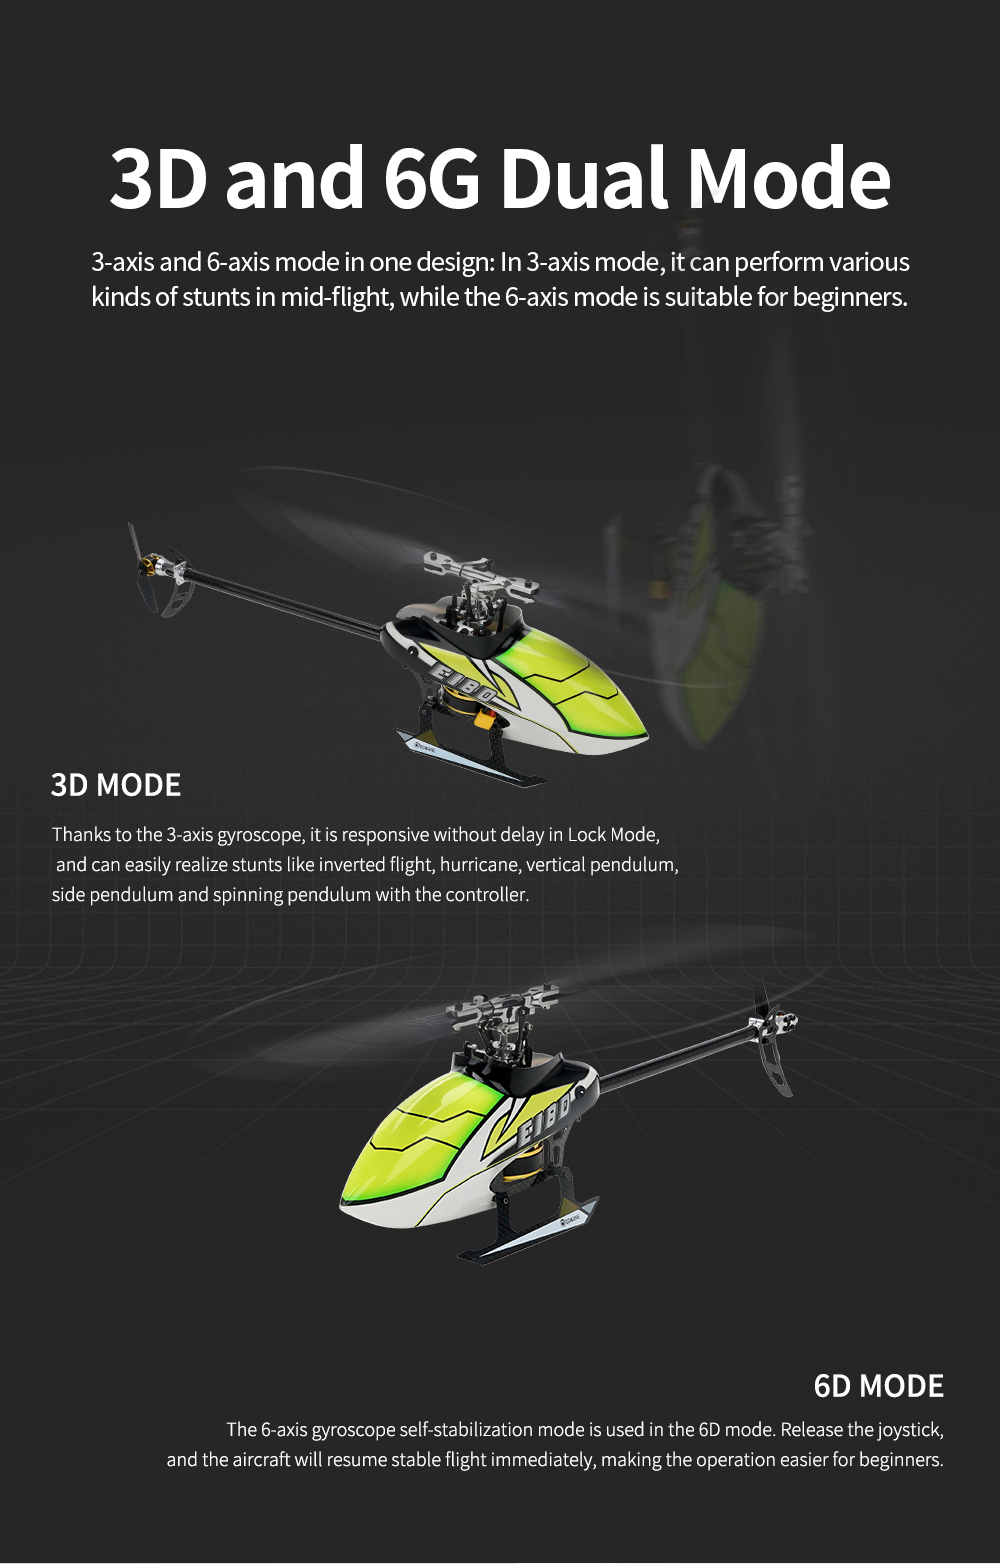 Eachine-E180-6CH-3D6G-System-Dual-Brushless-Direct-Drive-Motor-Flybarless-RC-Helicopter-RTF-Compatib-1810191-9